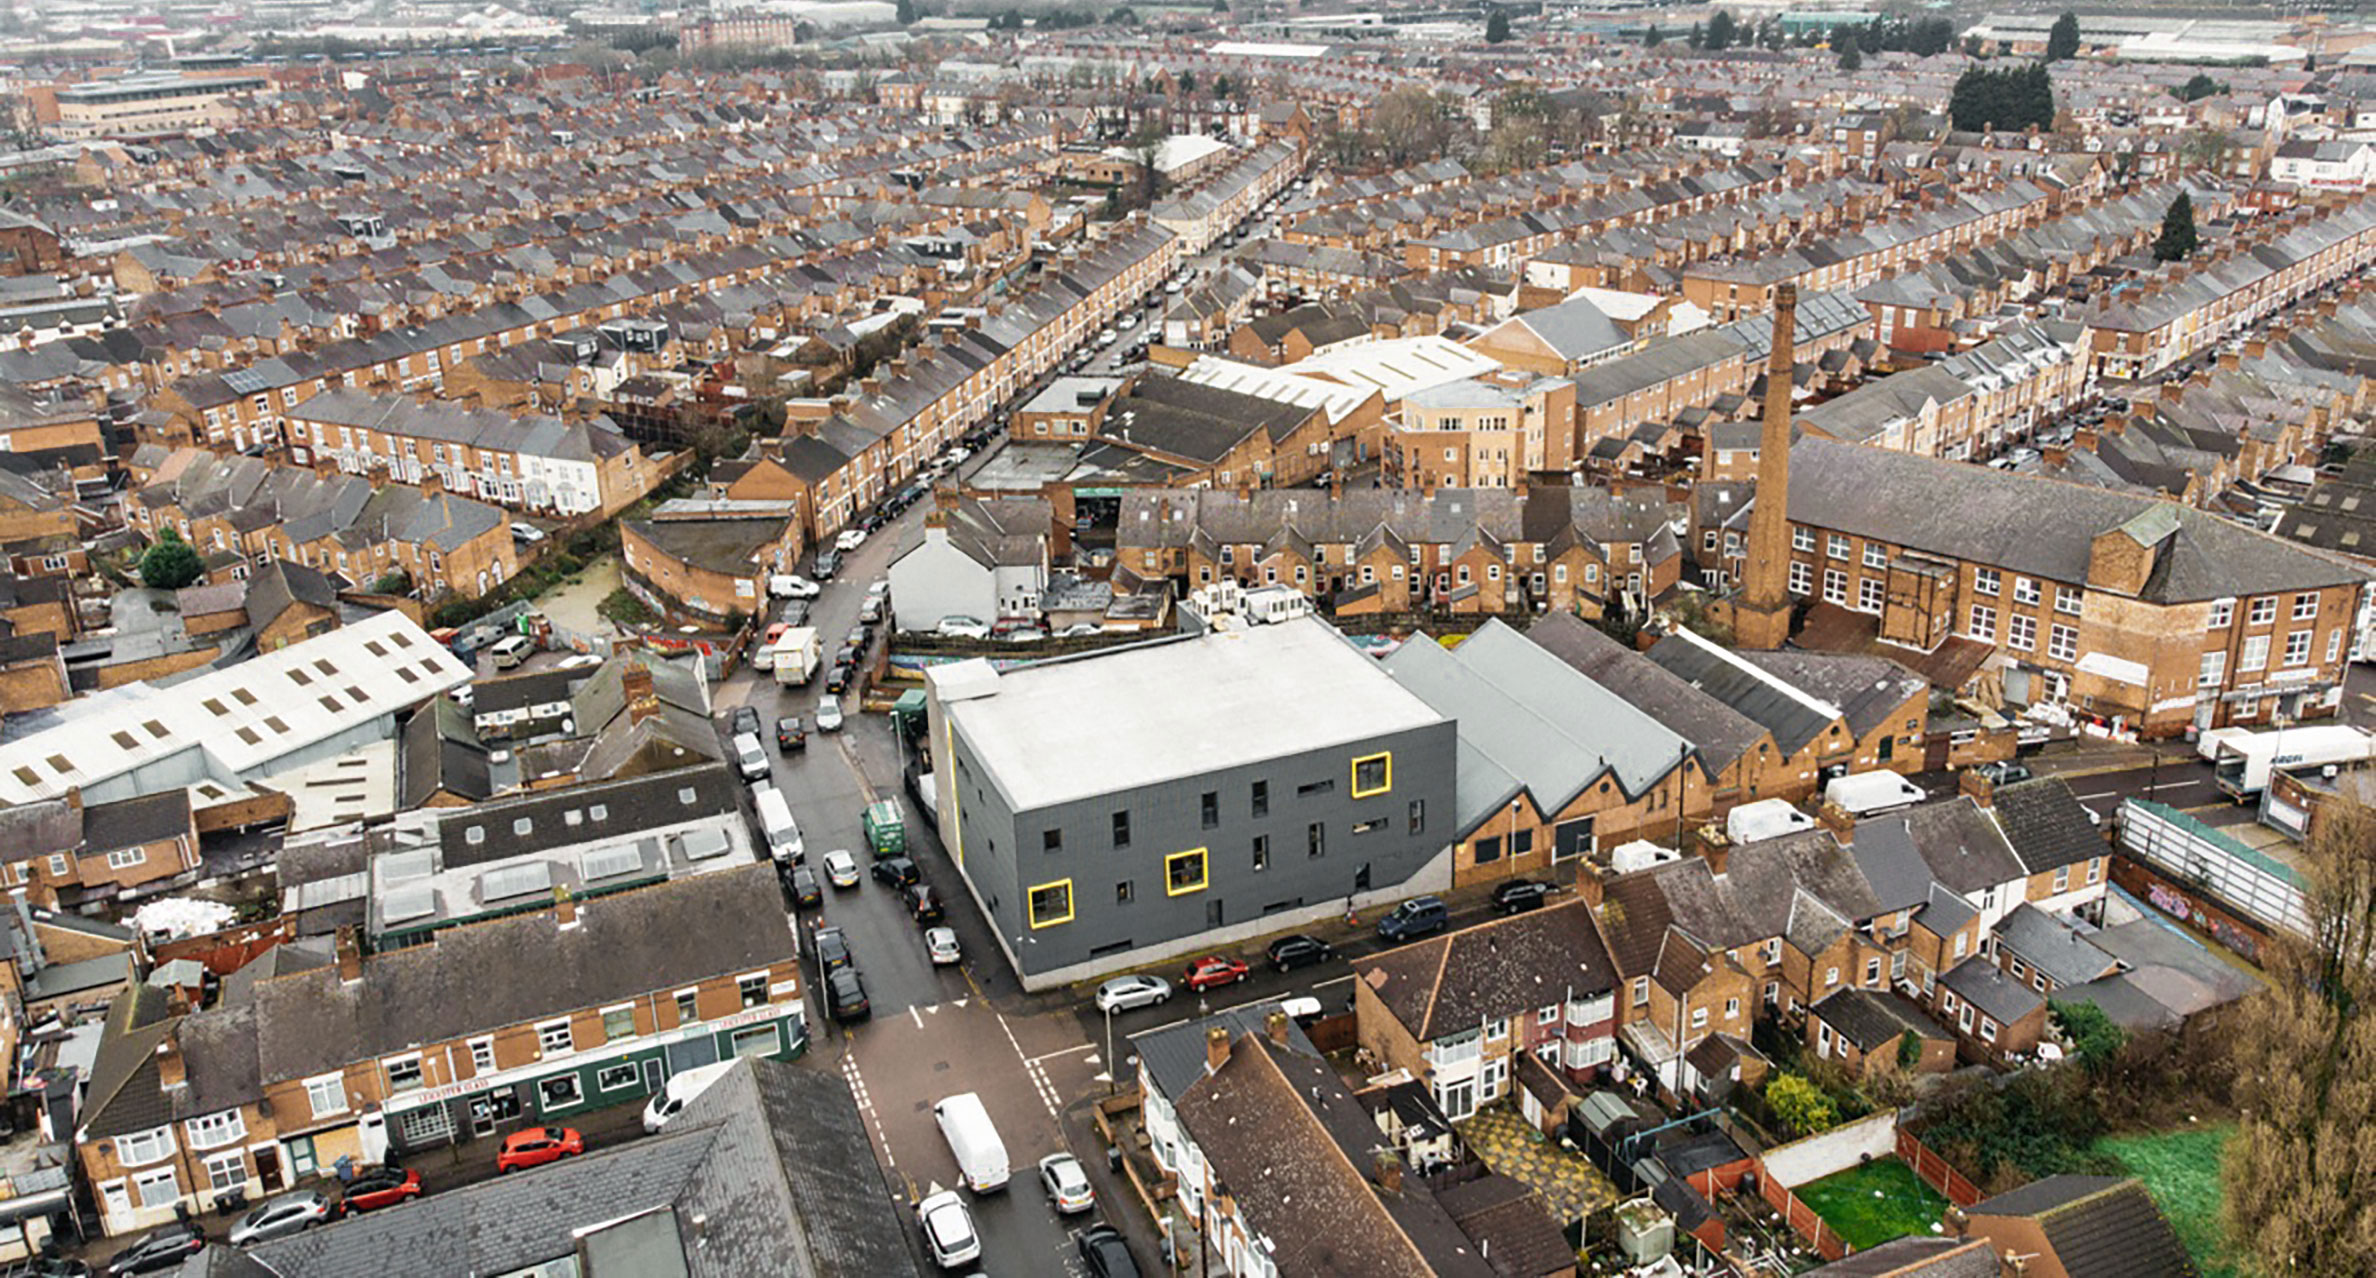 Aerial photograph out the factory and surrounding area, shows the top of many terraced house and other buildings, then the skyline at the far top